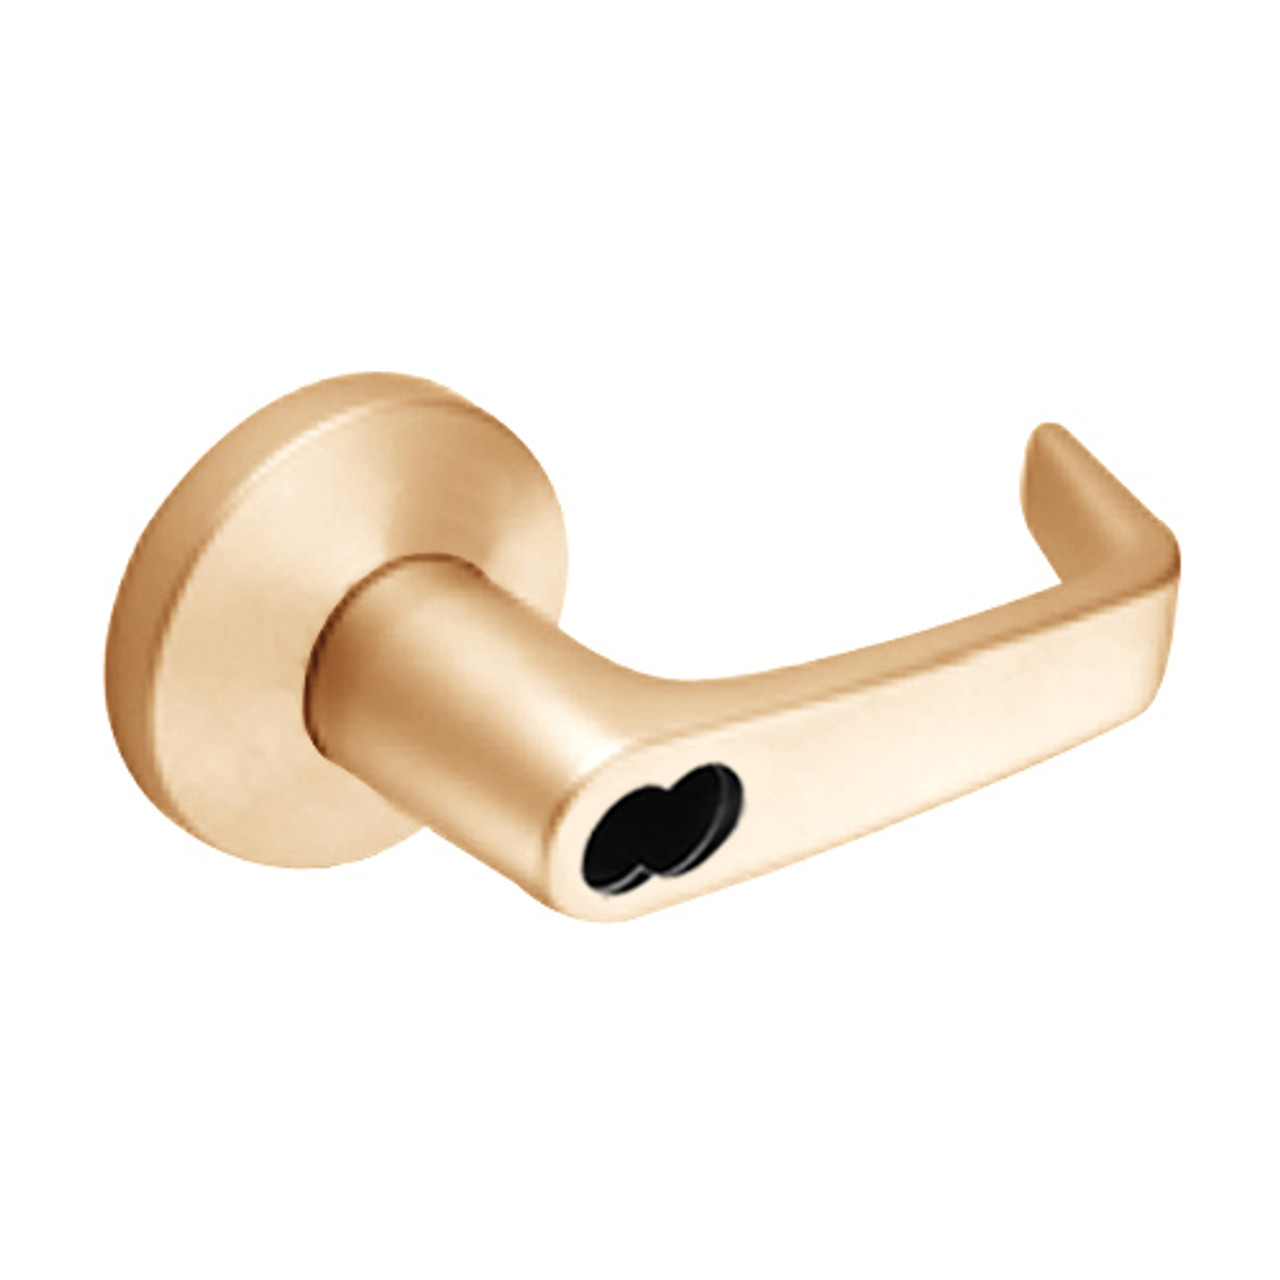 9K37A15KS3611 Best 9K Series Dormitory or Storeroom Cylindrical Lever Locks with Contour Angle with Return Lever Design Accept 7 Pin Best Core in Bright Bronze